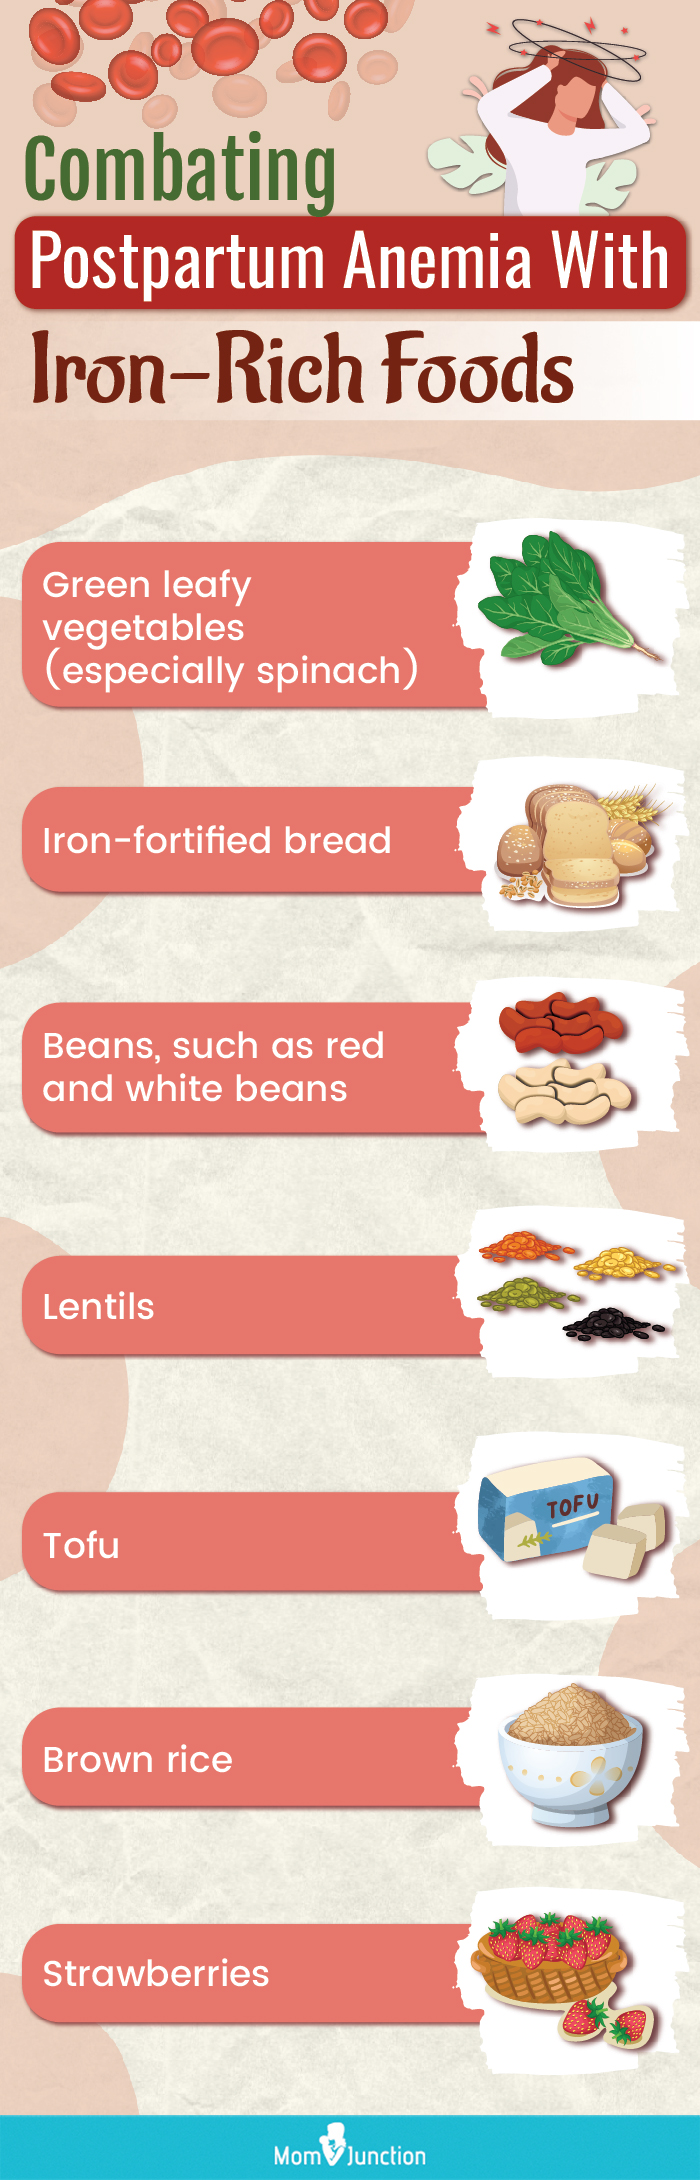 consuming iron rich foods to manage postpartum anemia (infographic)